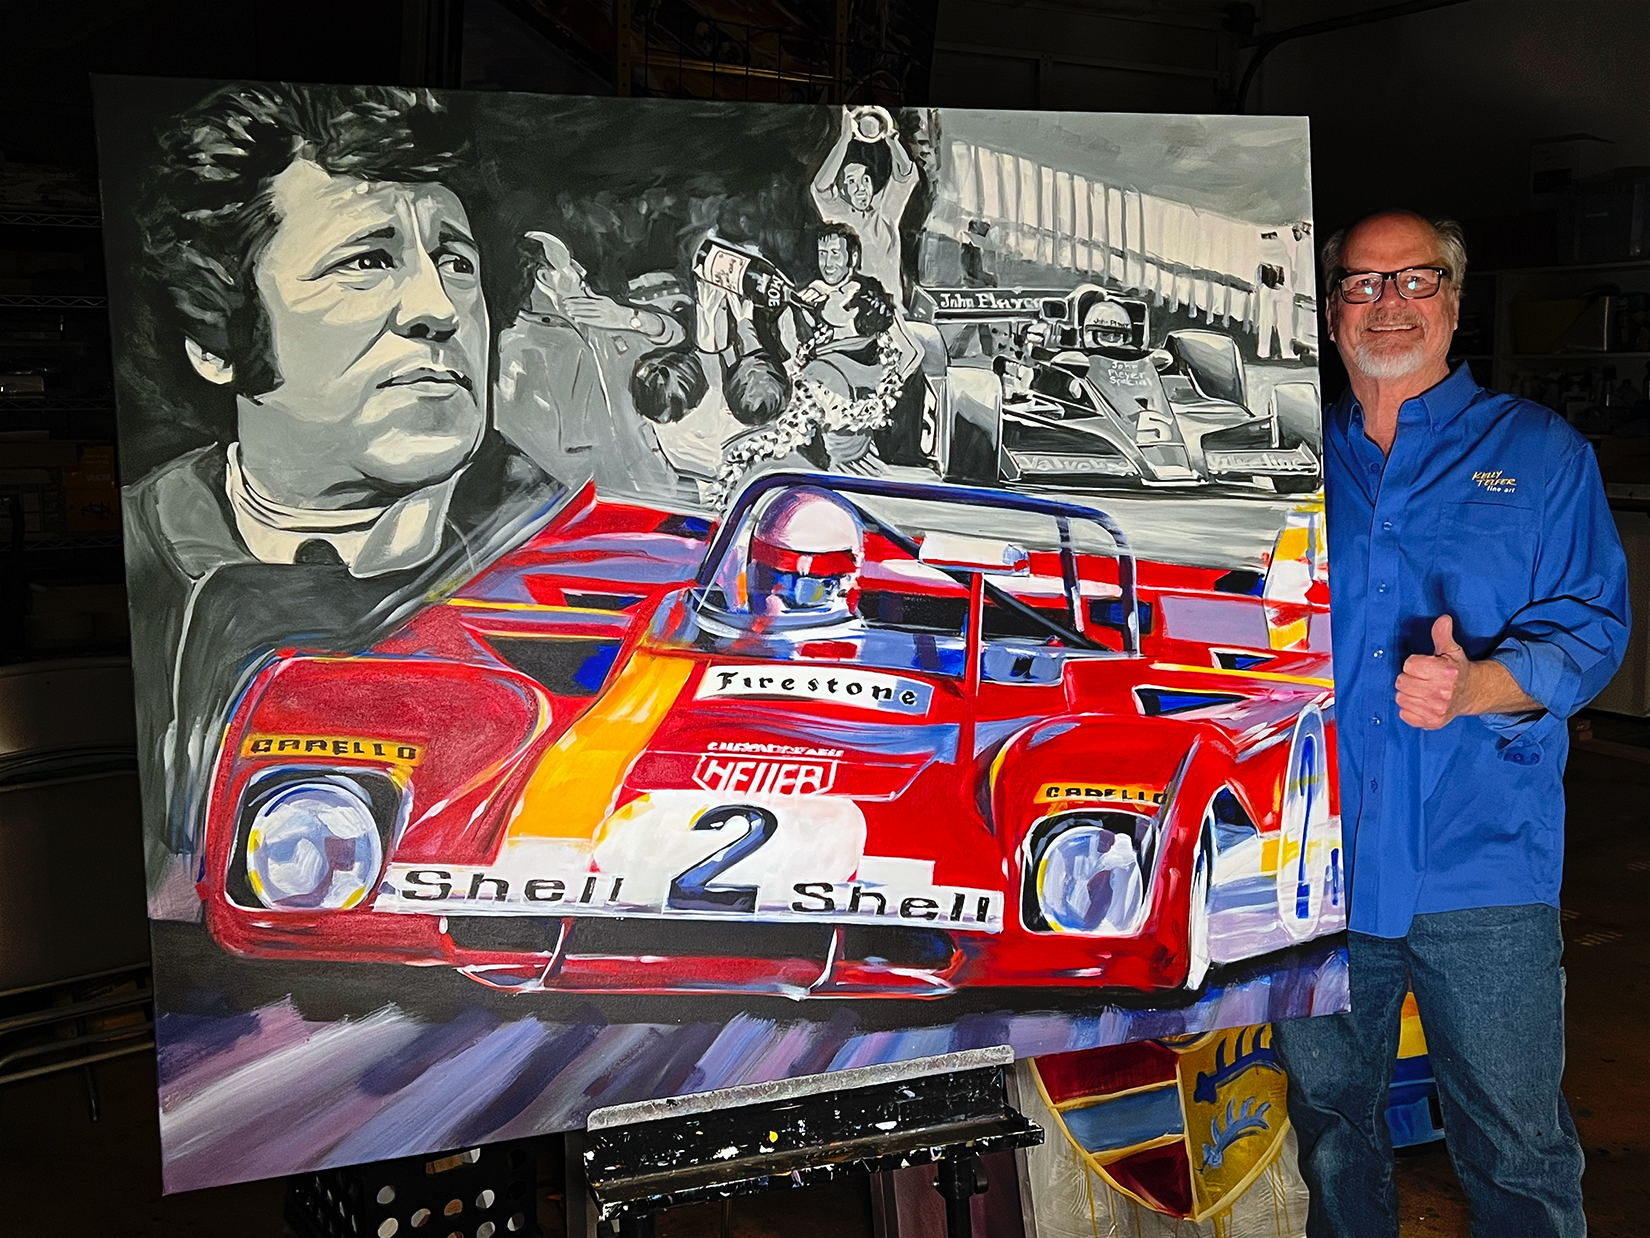 An Original Kelly Telfer Painting Signed by Mario Andretti Raises $138,000 At Auction for Charity